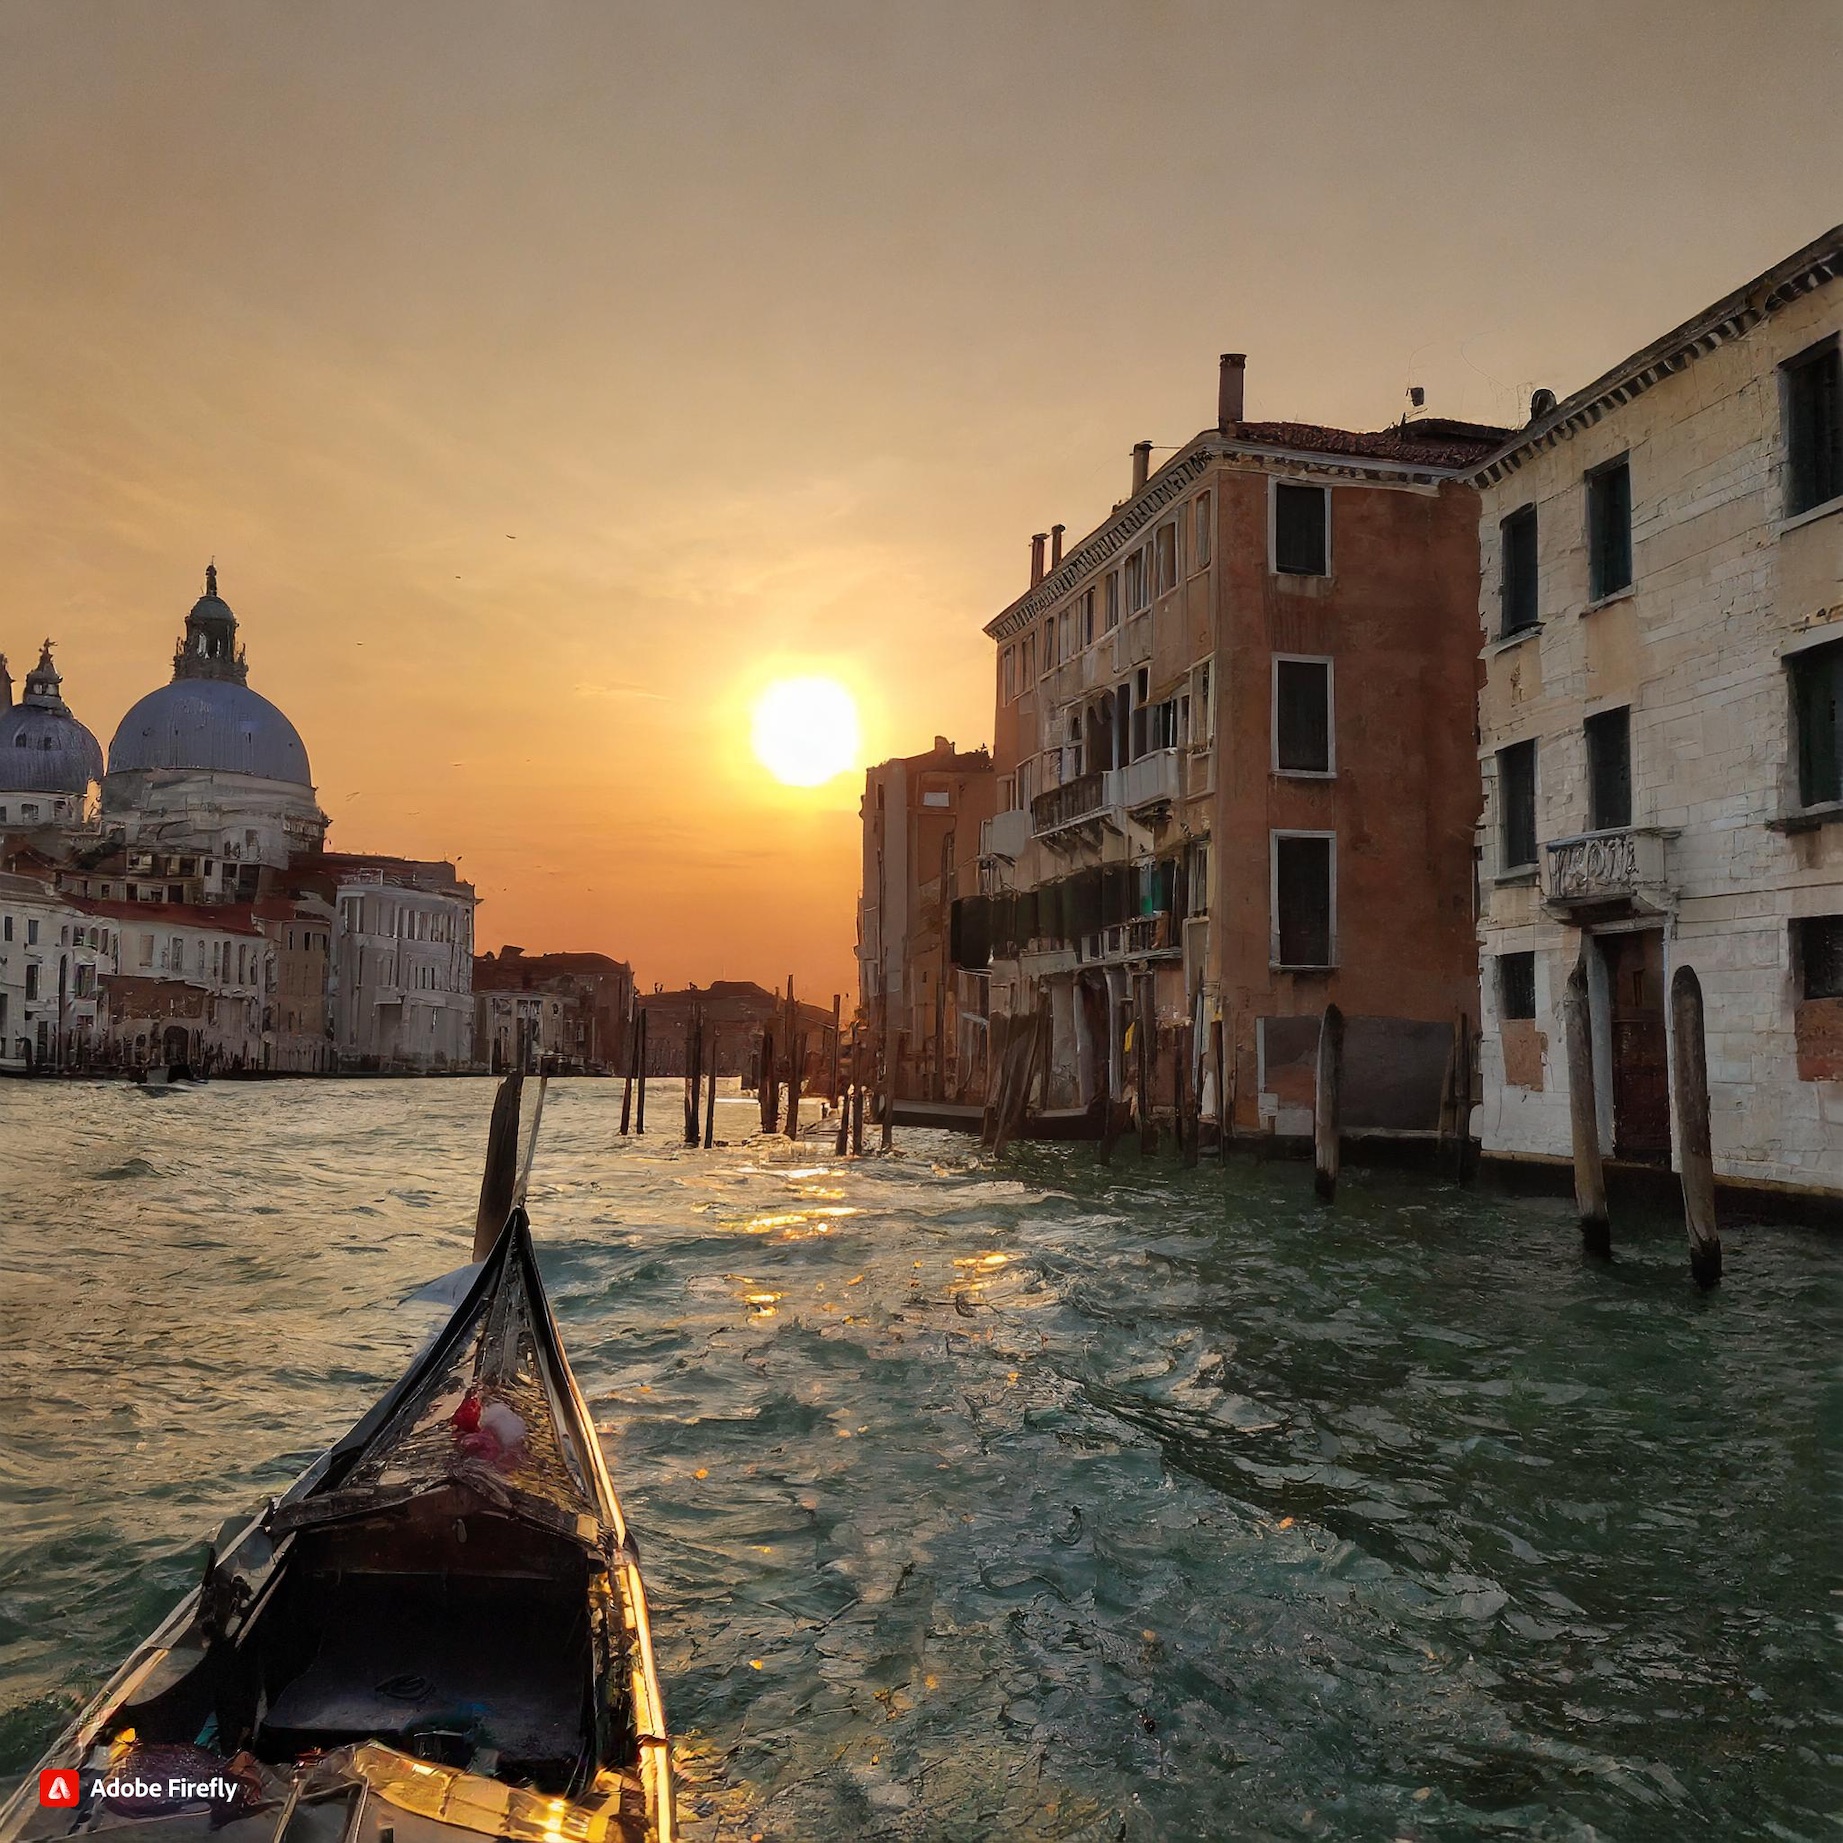  Firefly venice italy boat ride with a sunset 28776.jpg